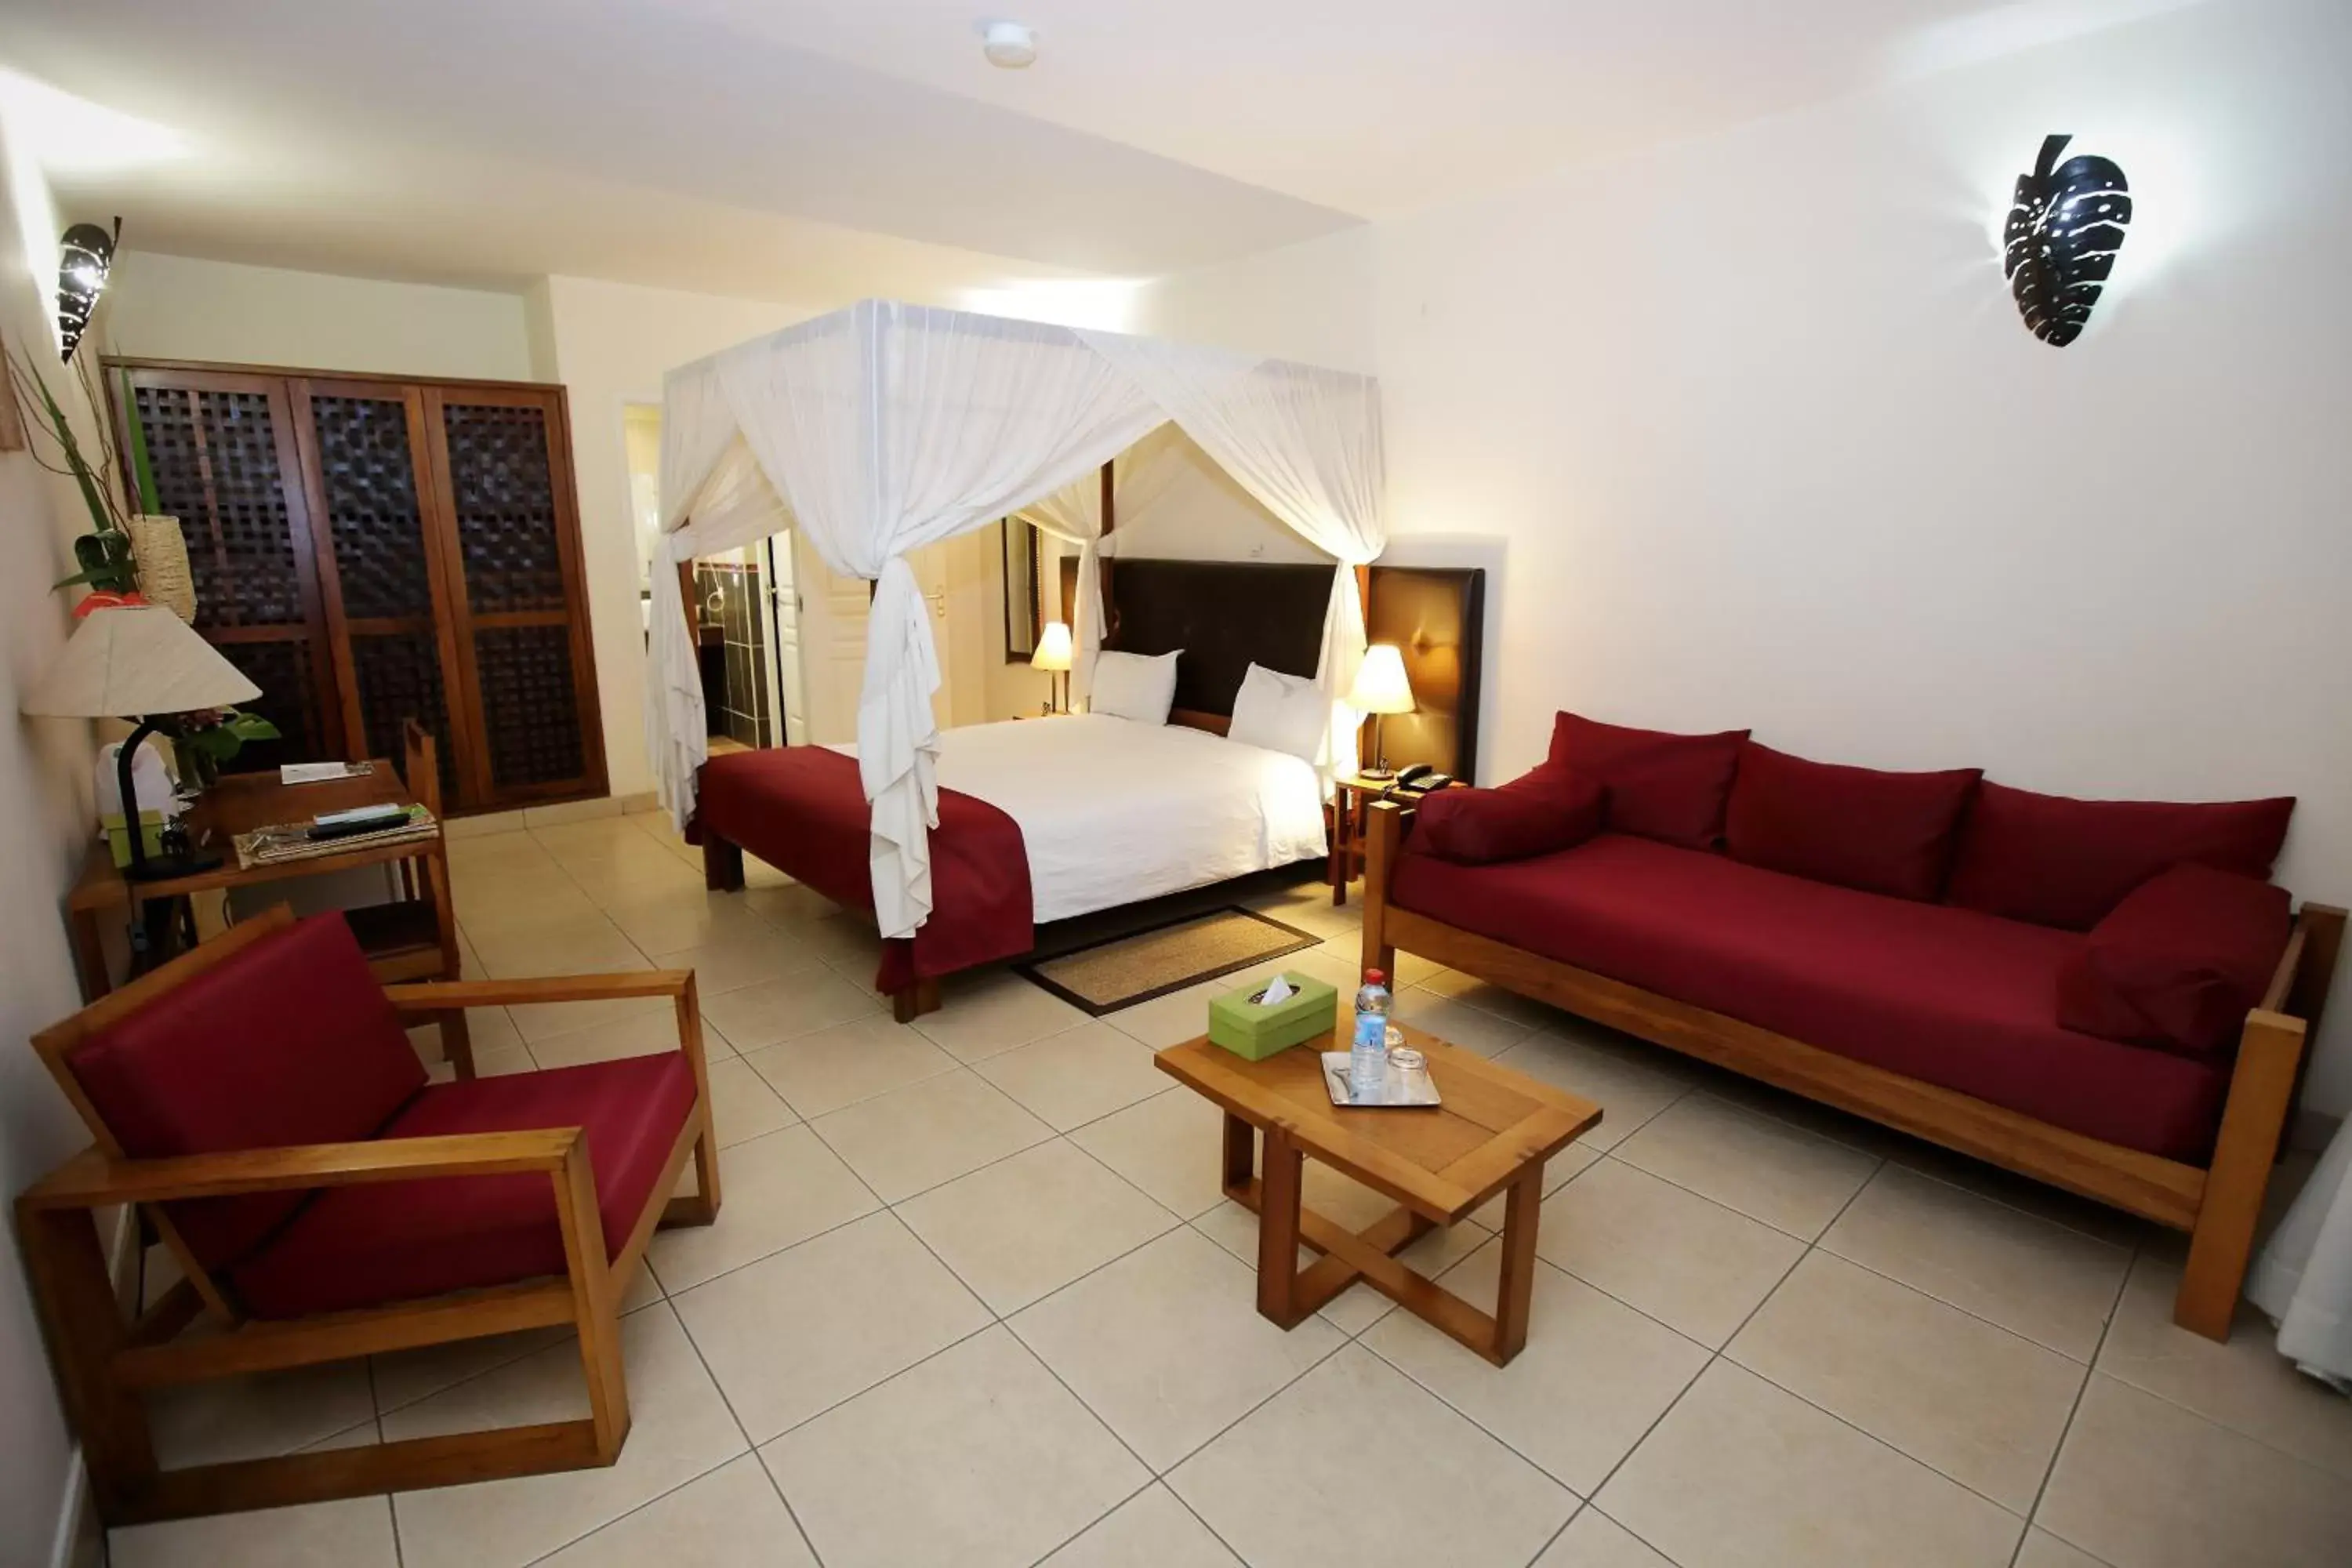 Bed, Room Photo in Relais des Plateaux & Spa– Ivato International Airport